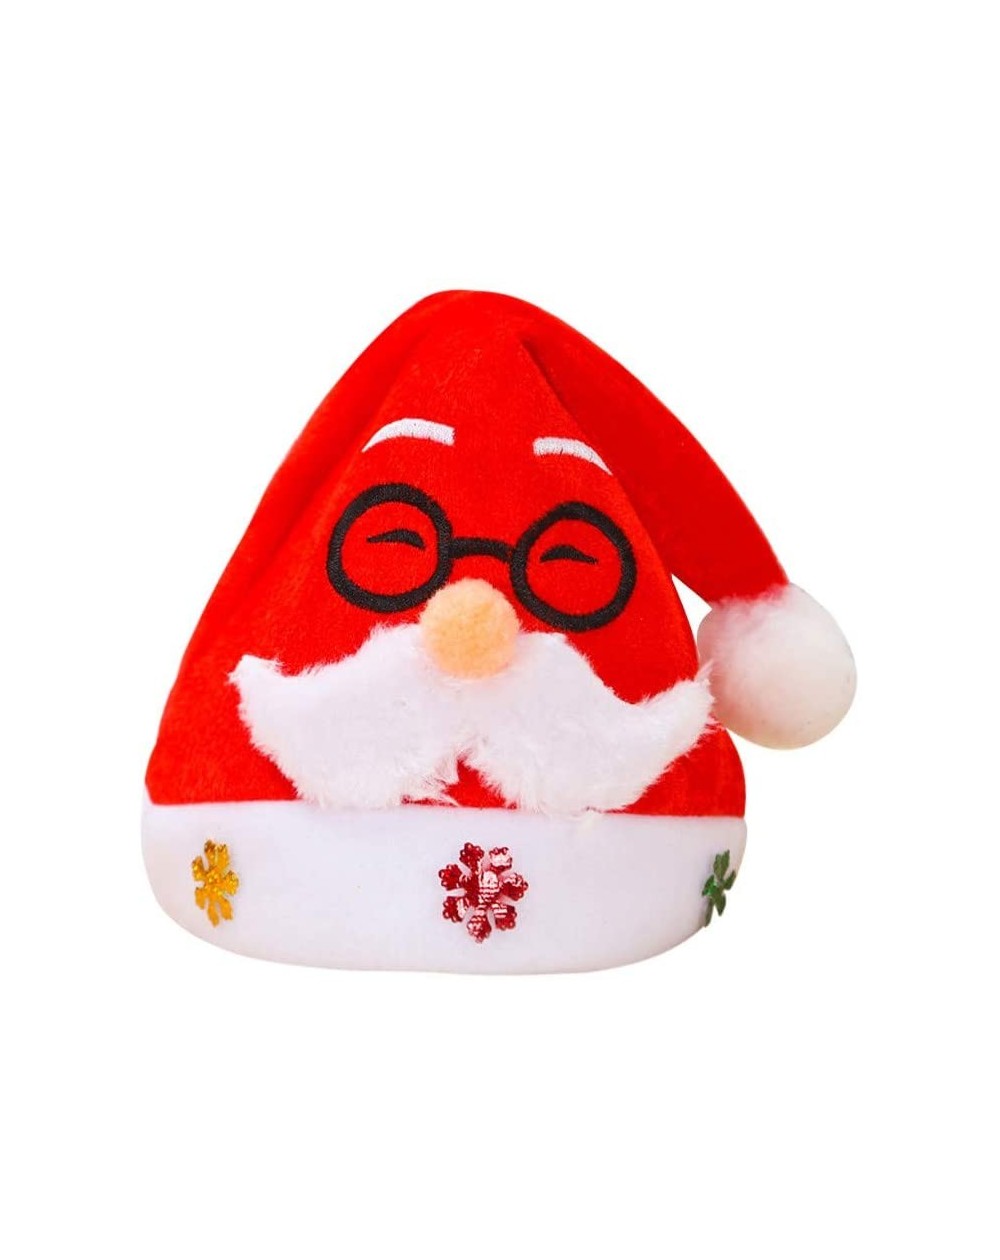 Hats Christmas Hat Adult Child Warm Santa Cap Ornaments Christmas Role Playing Holiday Xmas Party - Multicolor D - CO19I9H2S6...